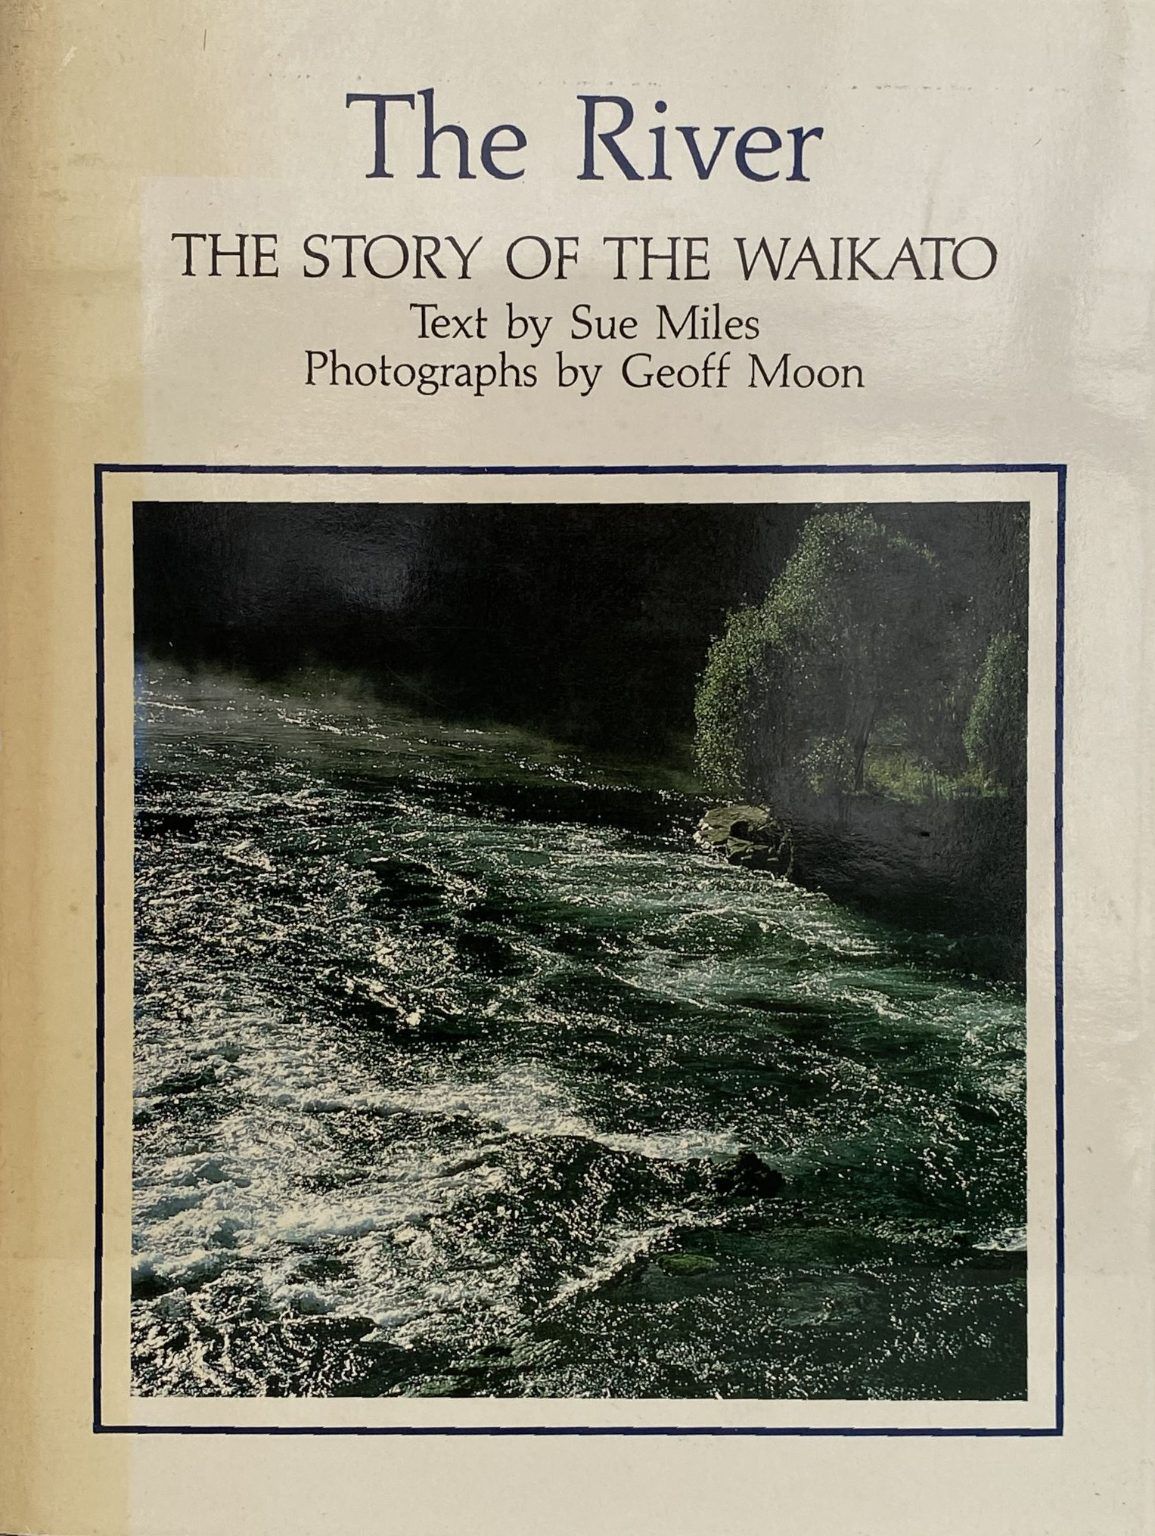 THE RIVER: The Story of the Waikato